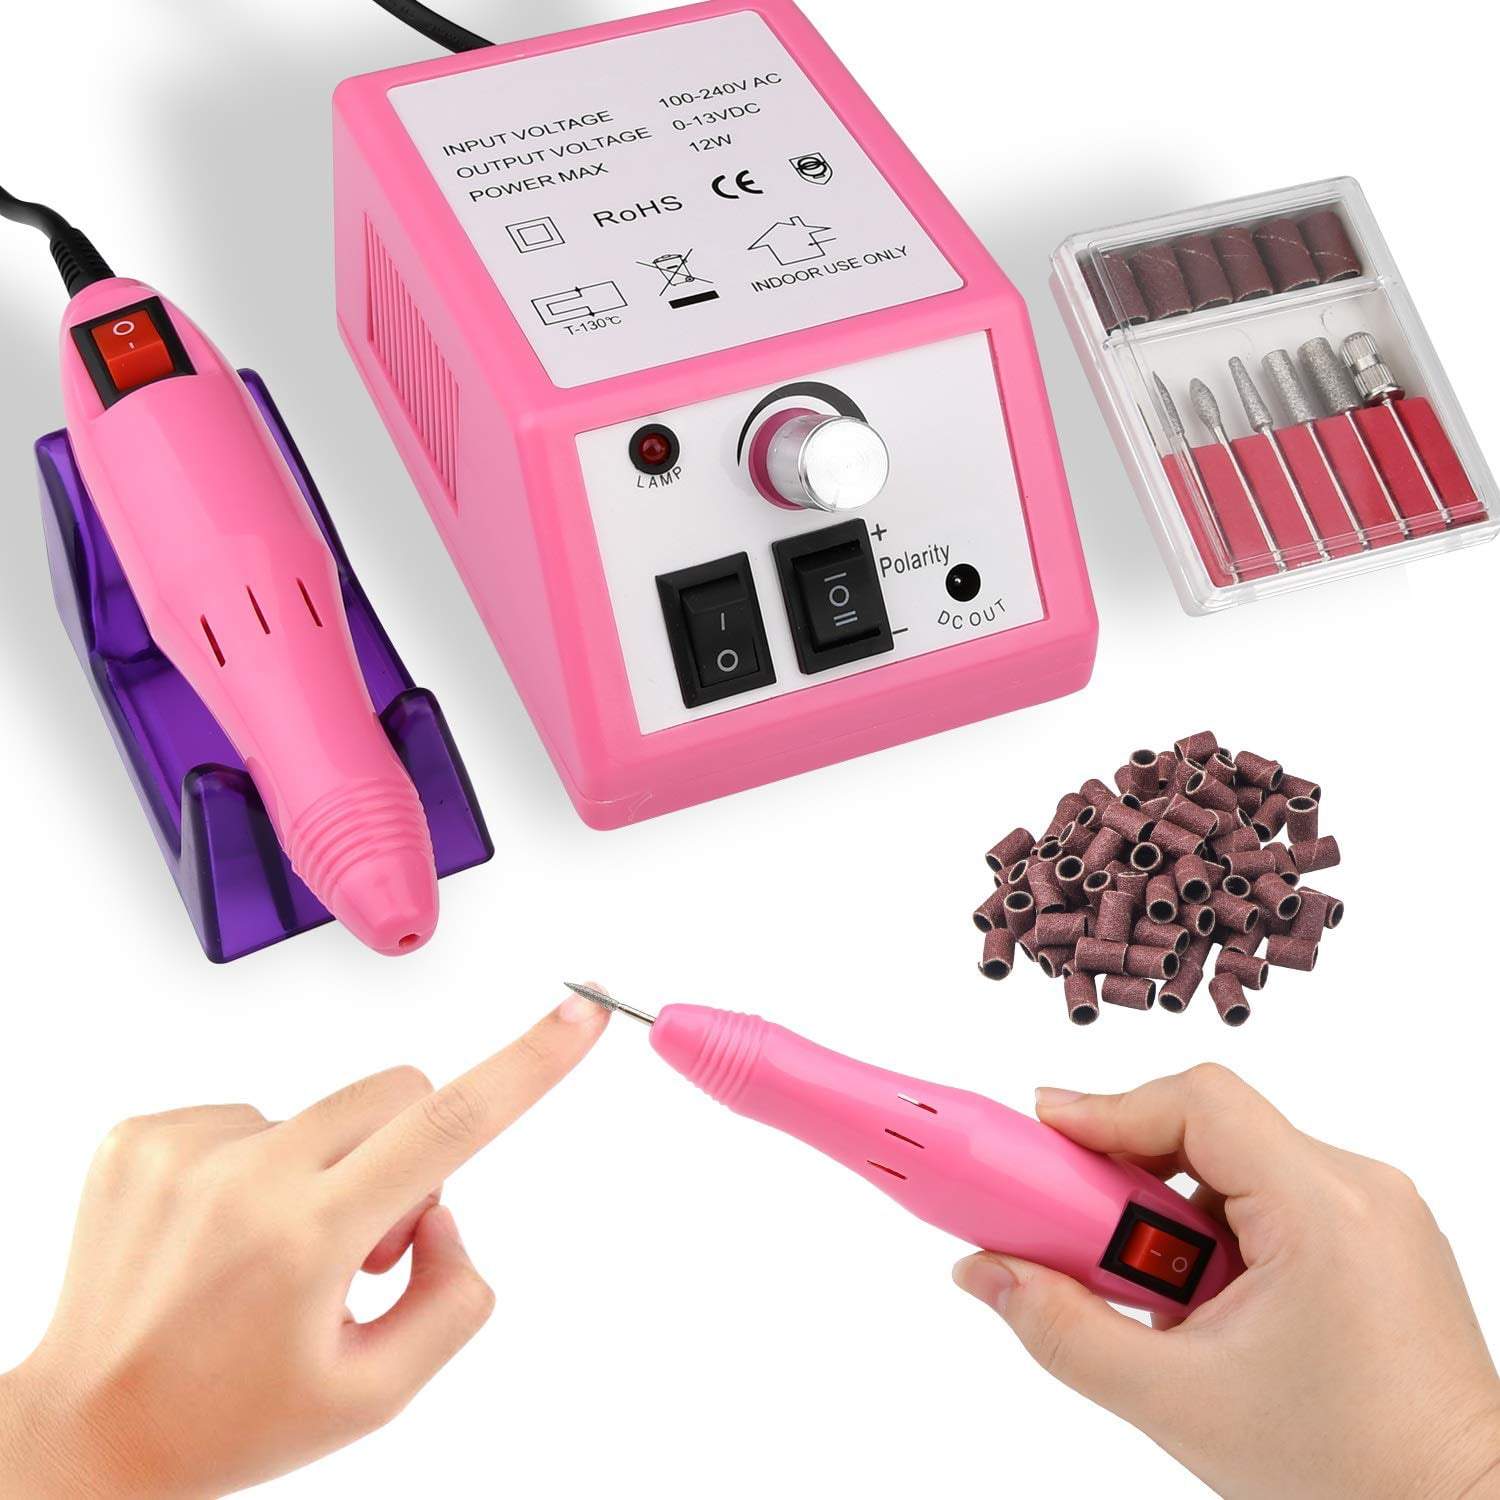 Electric Nail File Drill, Manicure Machine Art Acrylic Pedicure Tool Set  Kit Bits, Electric 20000RPM Light Electric Nail File Kits, Remove Nail Gel  Polish Nail Drills for Nails Design Home Salon Use -